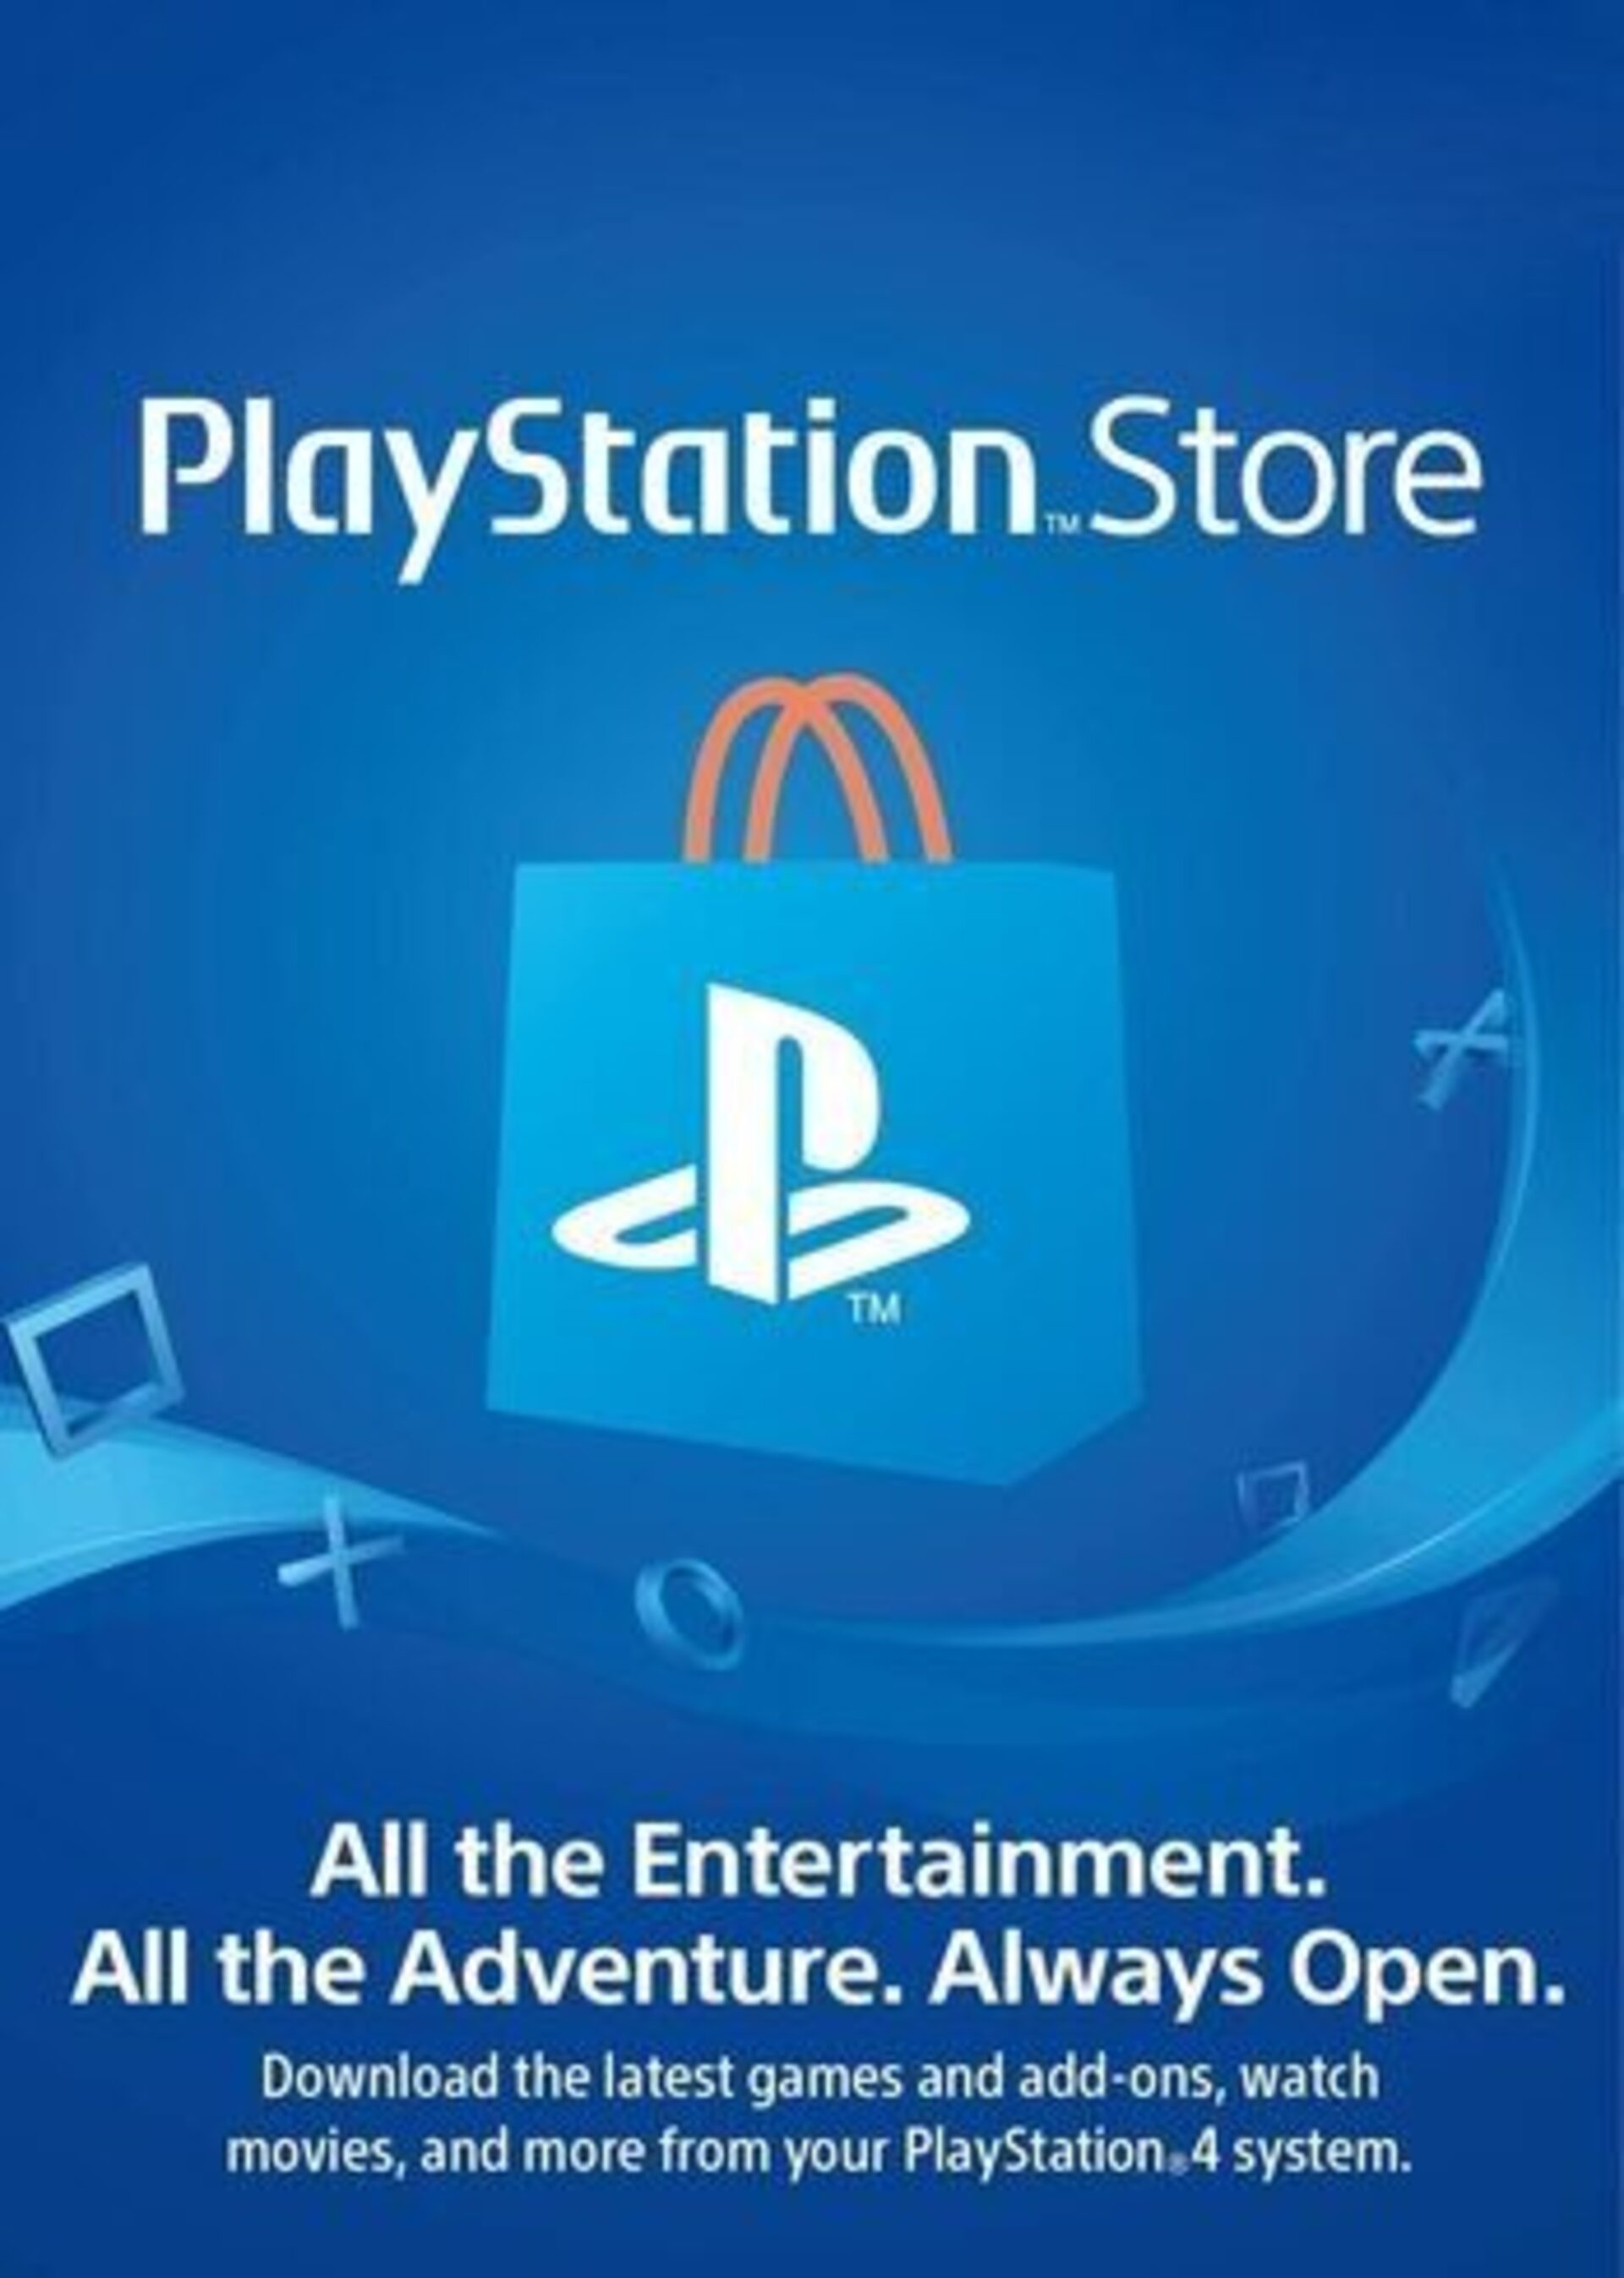 Buy PlayStation Store Cards online at Geekay – PlayStation Network Cards, PlayStation  Plus Membership Cards, PlayStation Now Subscription Cards, and more at the  best prices. Instant Delivery in Dubai, Abu Dhabi, Sharjah